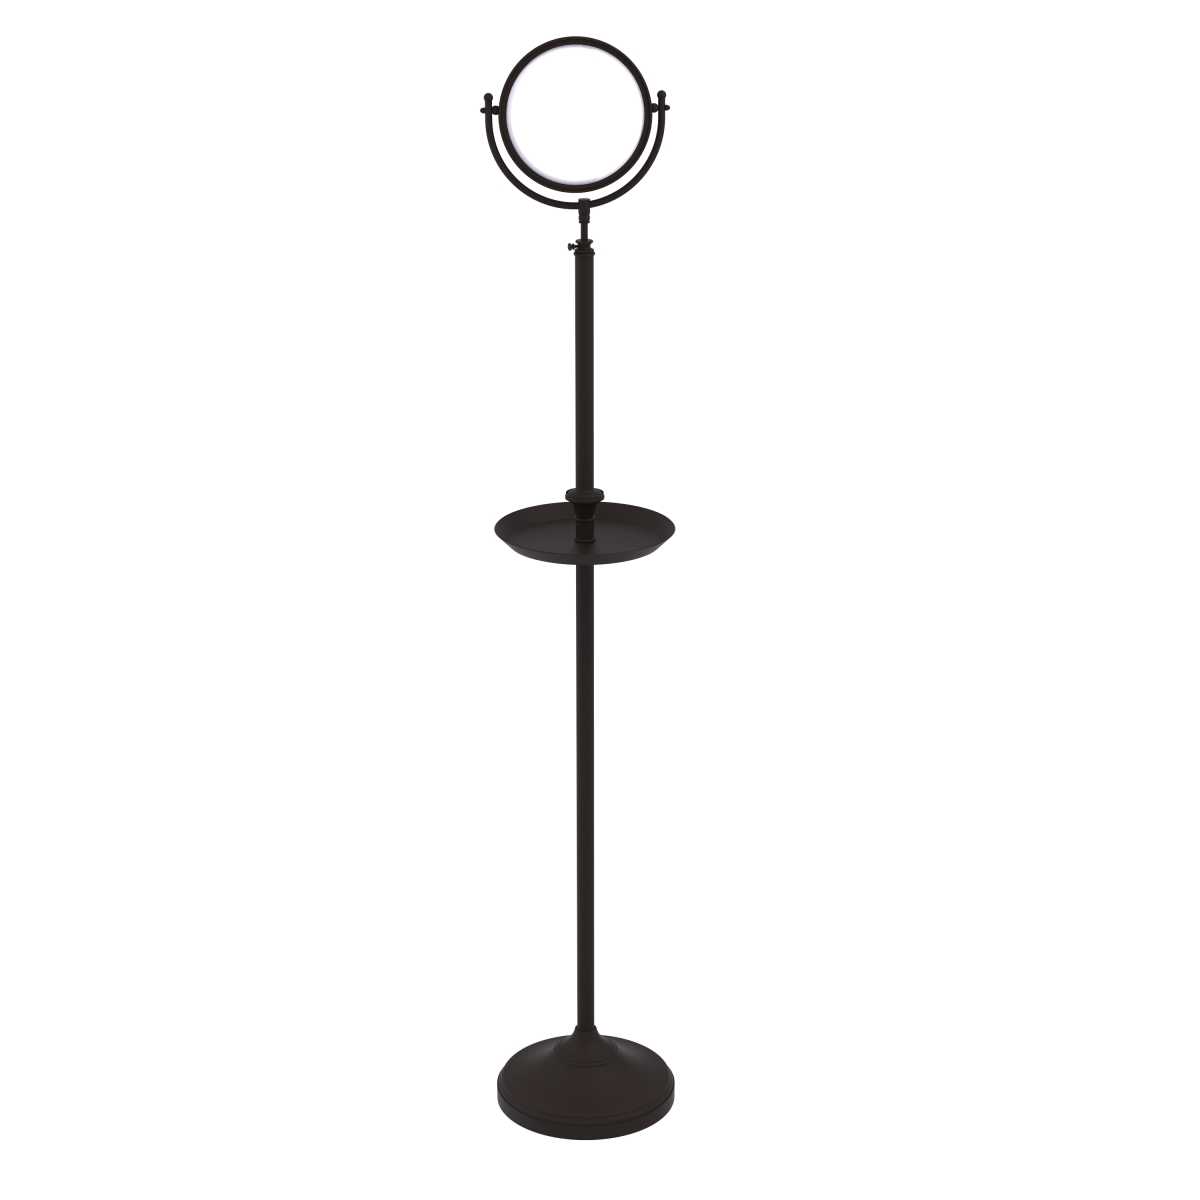 Allied Brass DMF-3-2X-ORB Floor Standing Make-Up Mirror 8 in. Diameter with 2X Magnification & Shaving Tray, Oil Rubbed Bronze